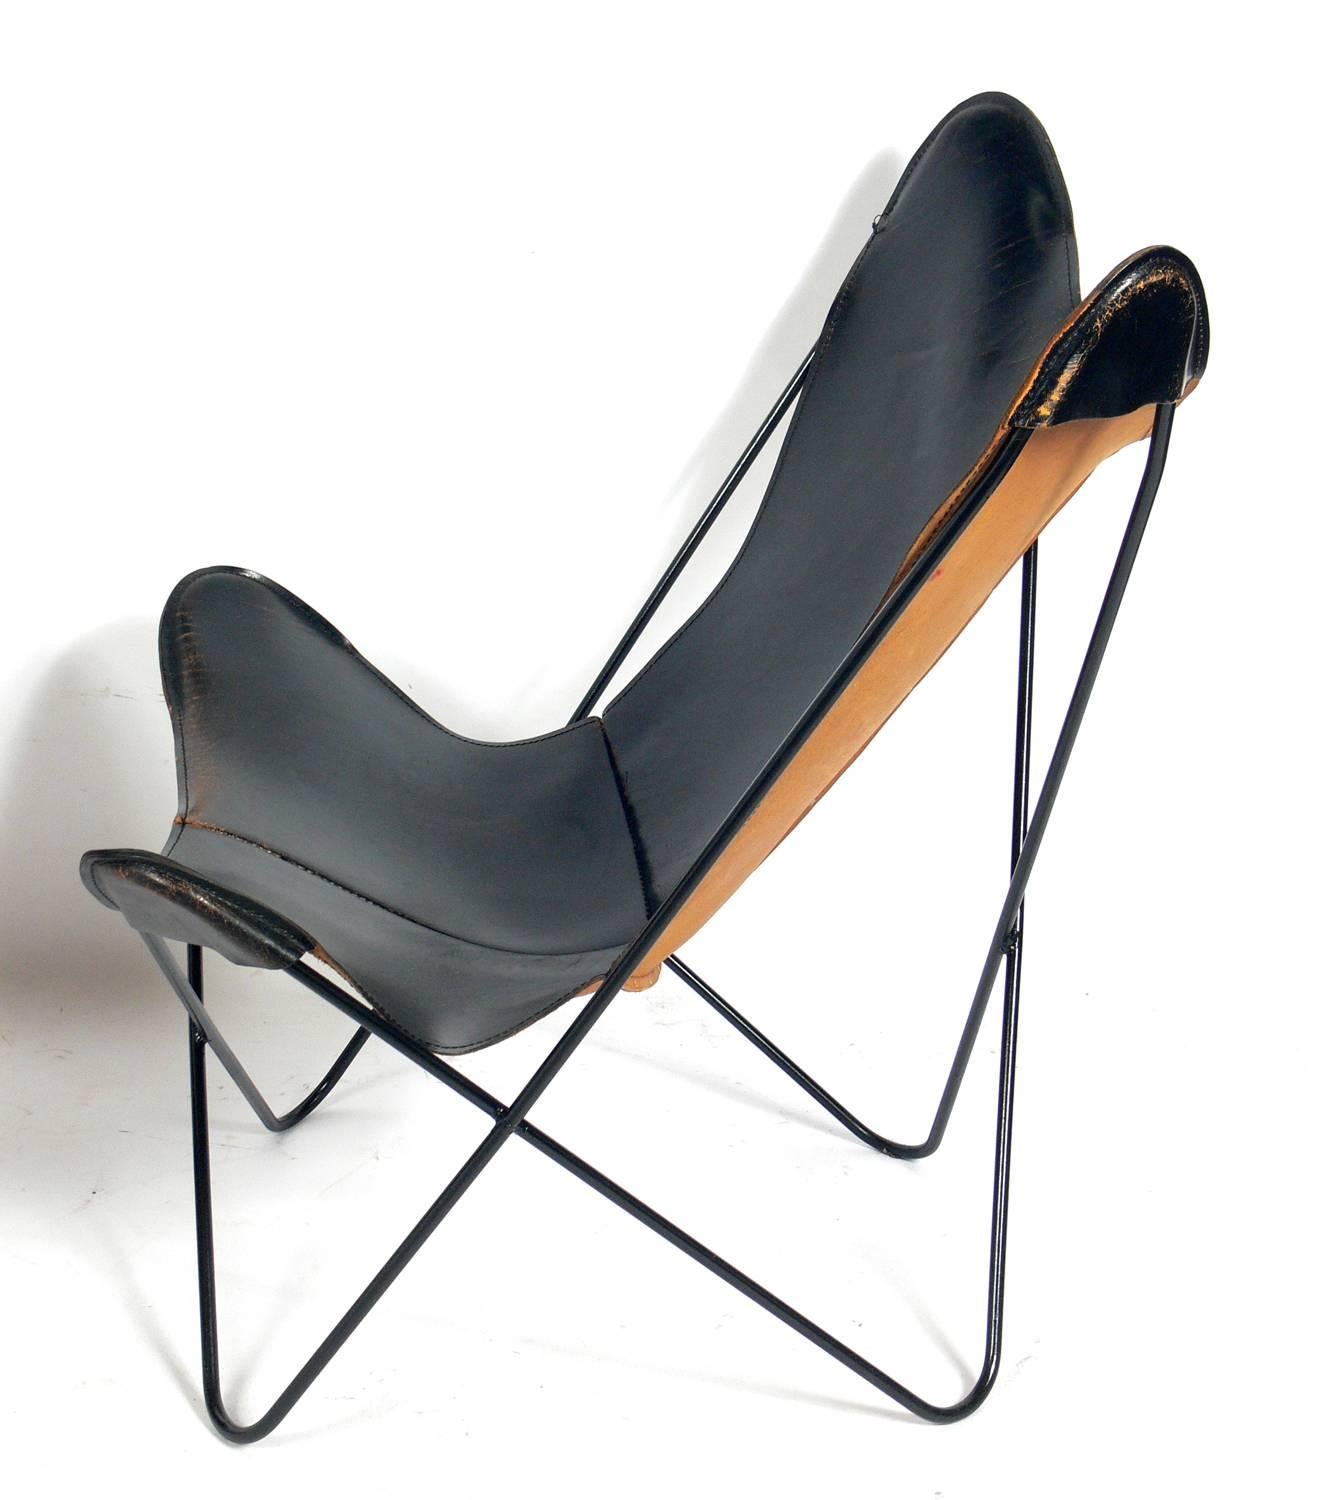 Mid-20th Century Sculptural Leather Butterfly Chairs Designed by Jorge Ferrari-Hardoy